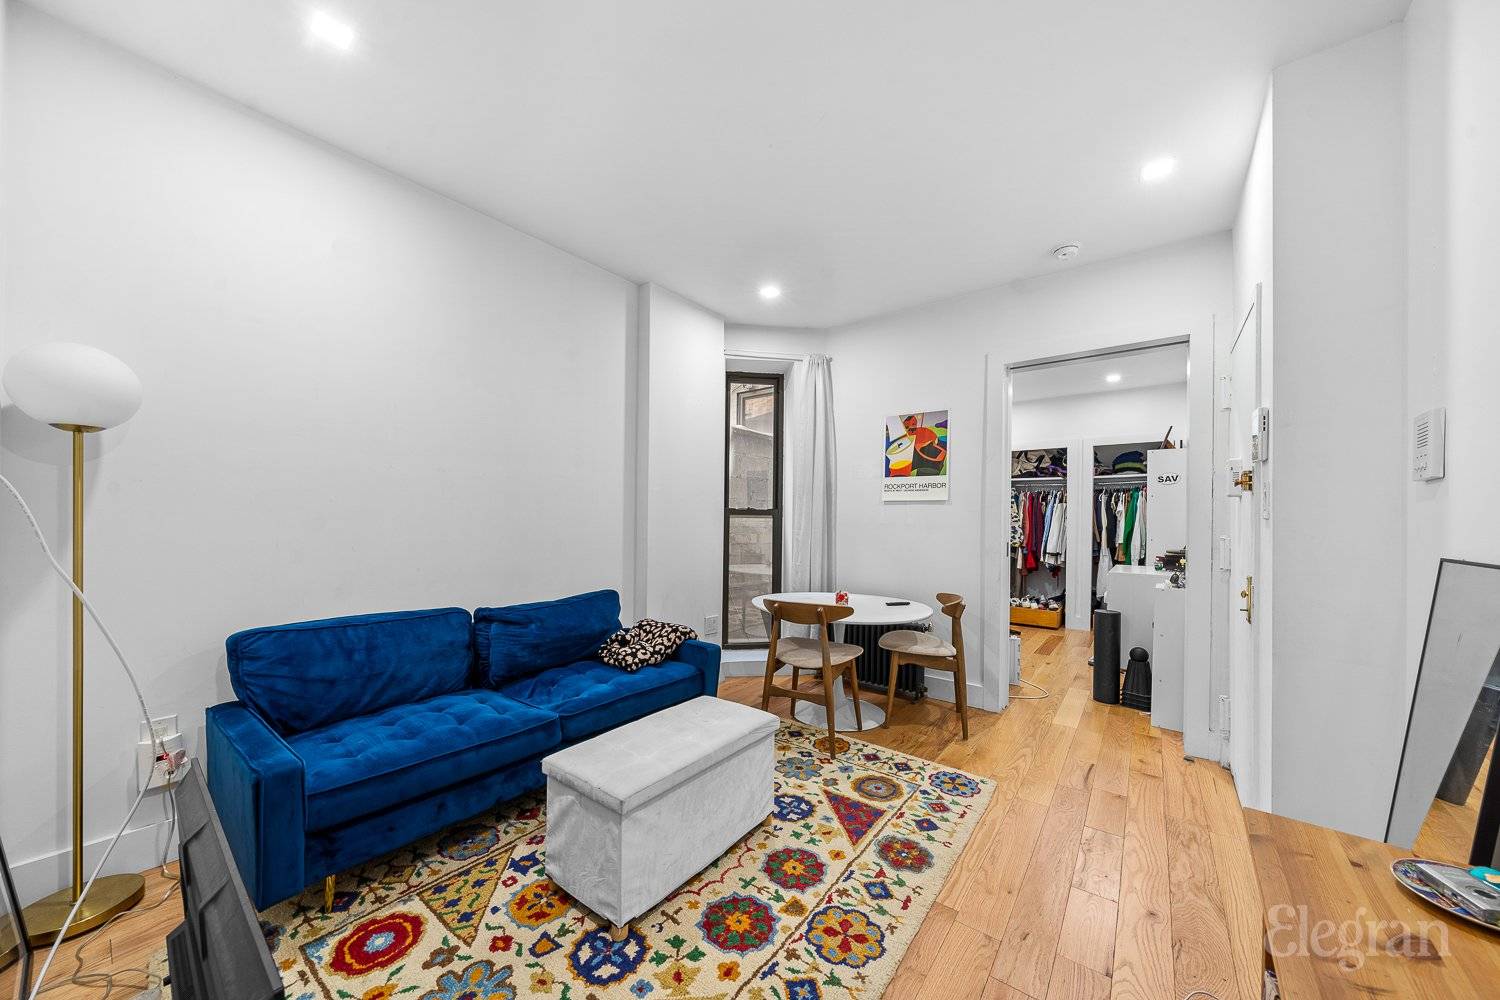 Perfectly laid out 2 bedroom 1 bathroom apartment in NoLiTa in unit laundry amp ; dishwasher Unit 4 features brand new renovation work, from the flooring, through the kitchen appliances ...